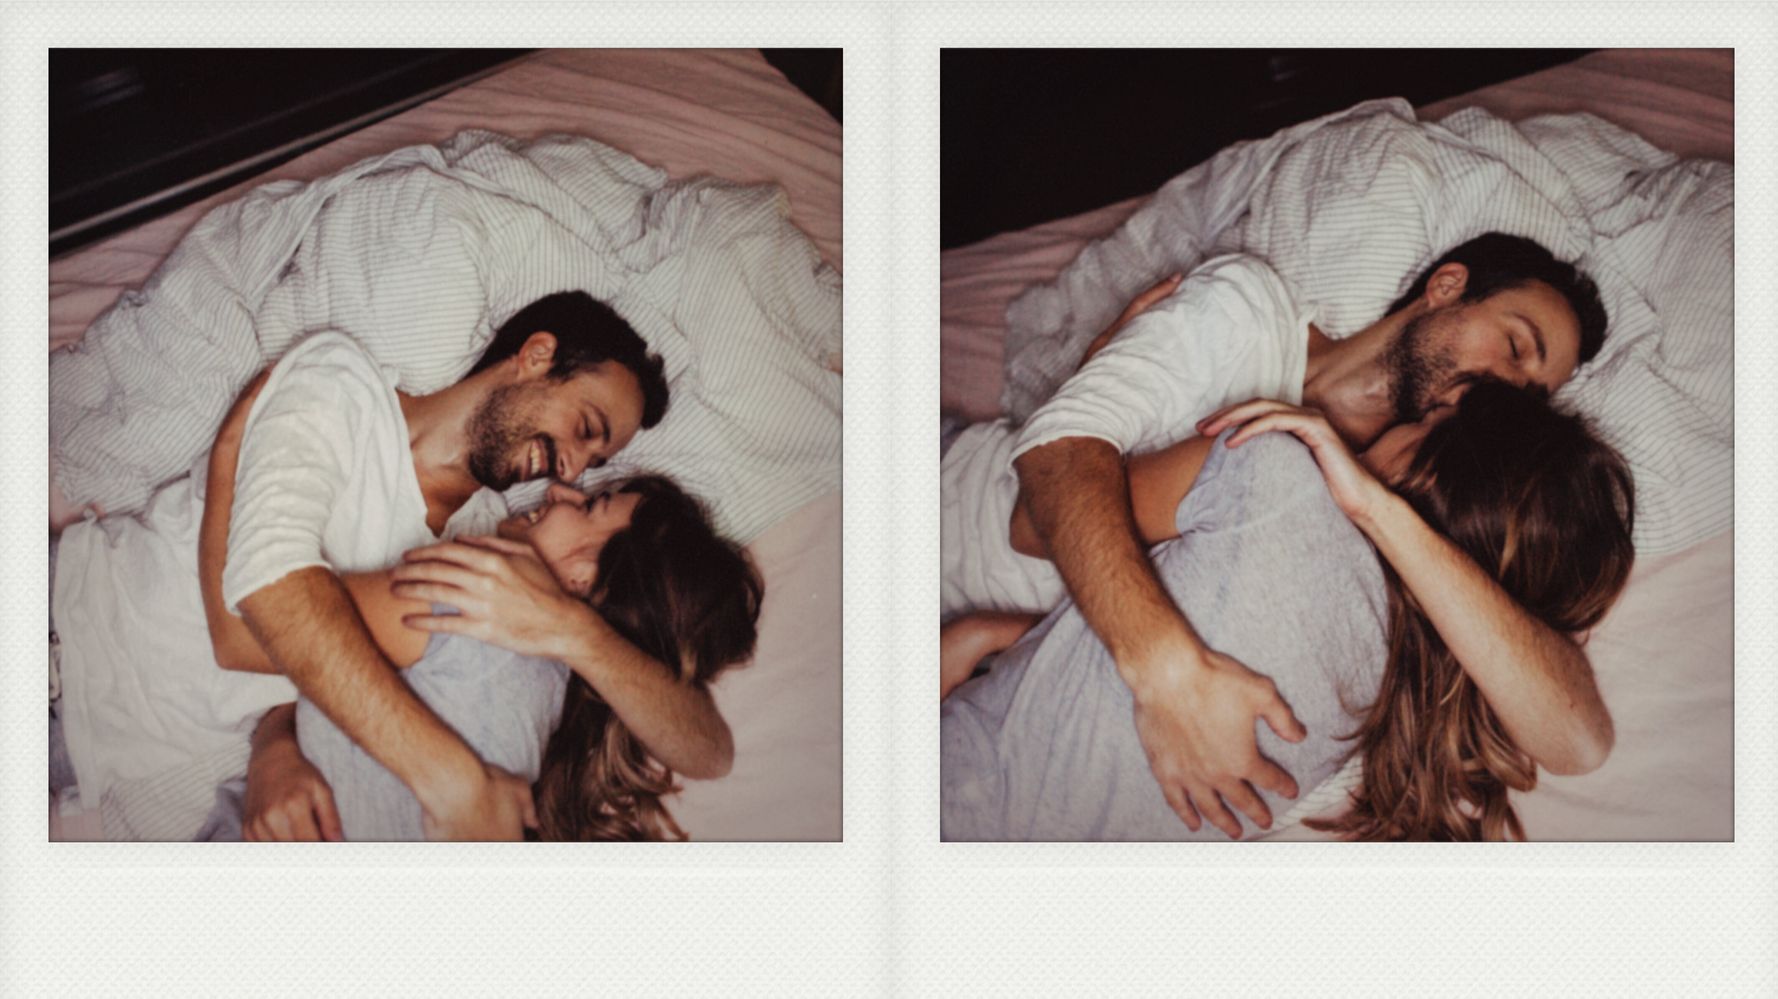 16 Little Things Happy Couples Do For Each Other Every Night